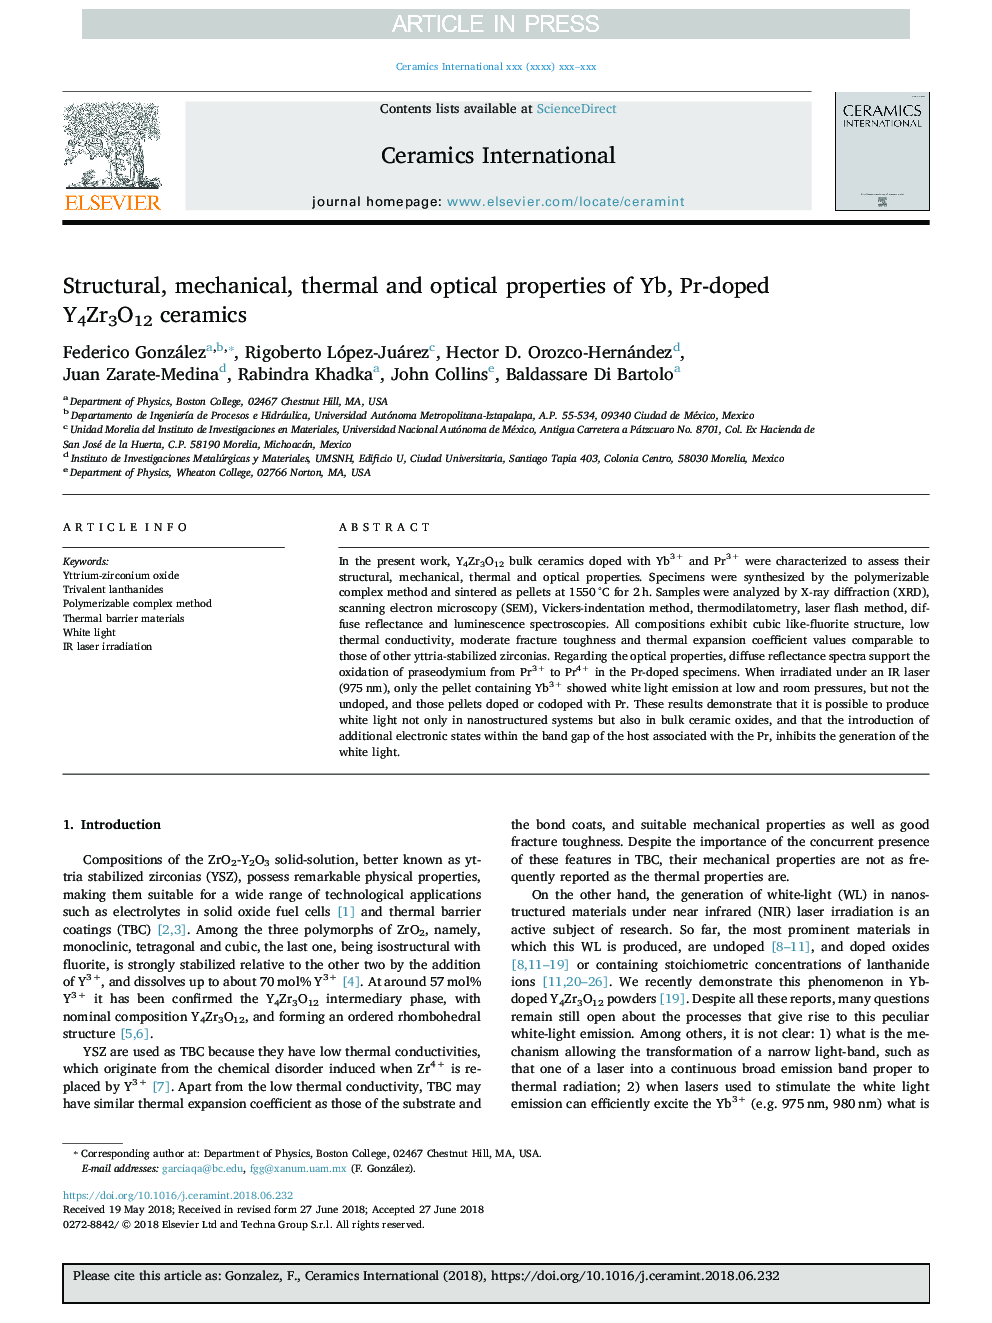 Structural, mechanical, thermal and optical properties of Yb, Pr-doped Y4Zr3O12 ceramics